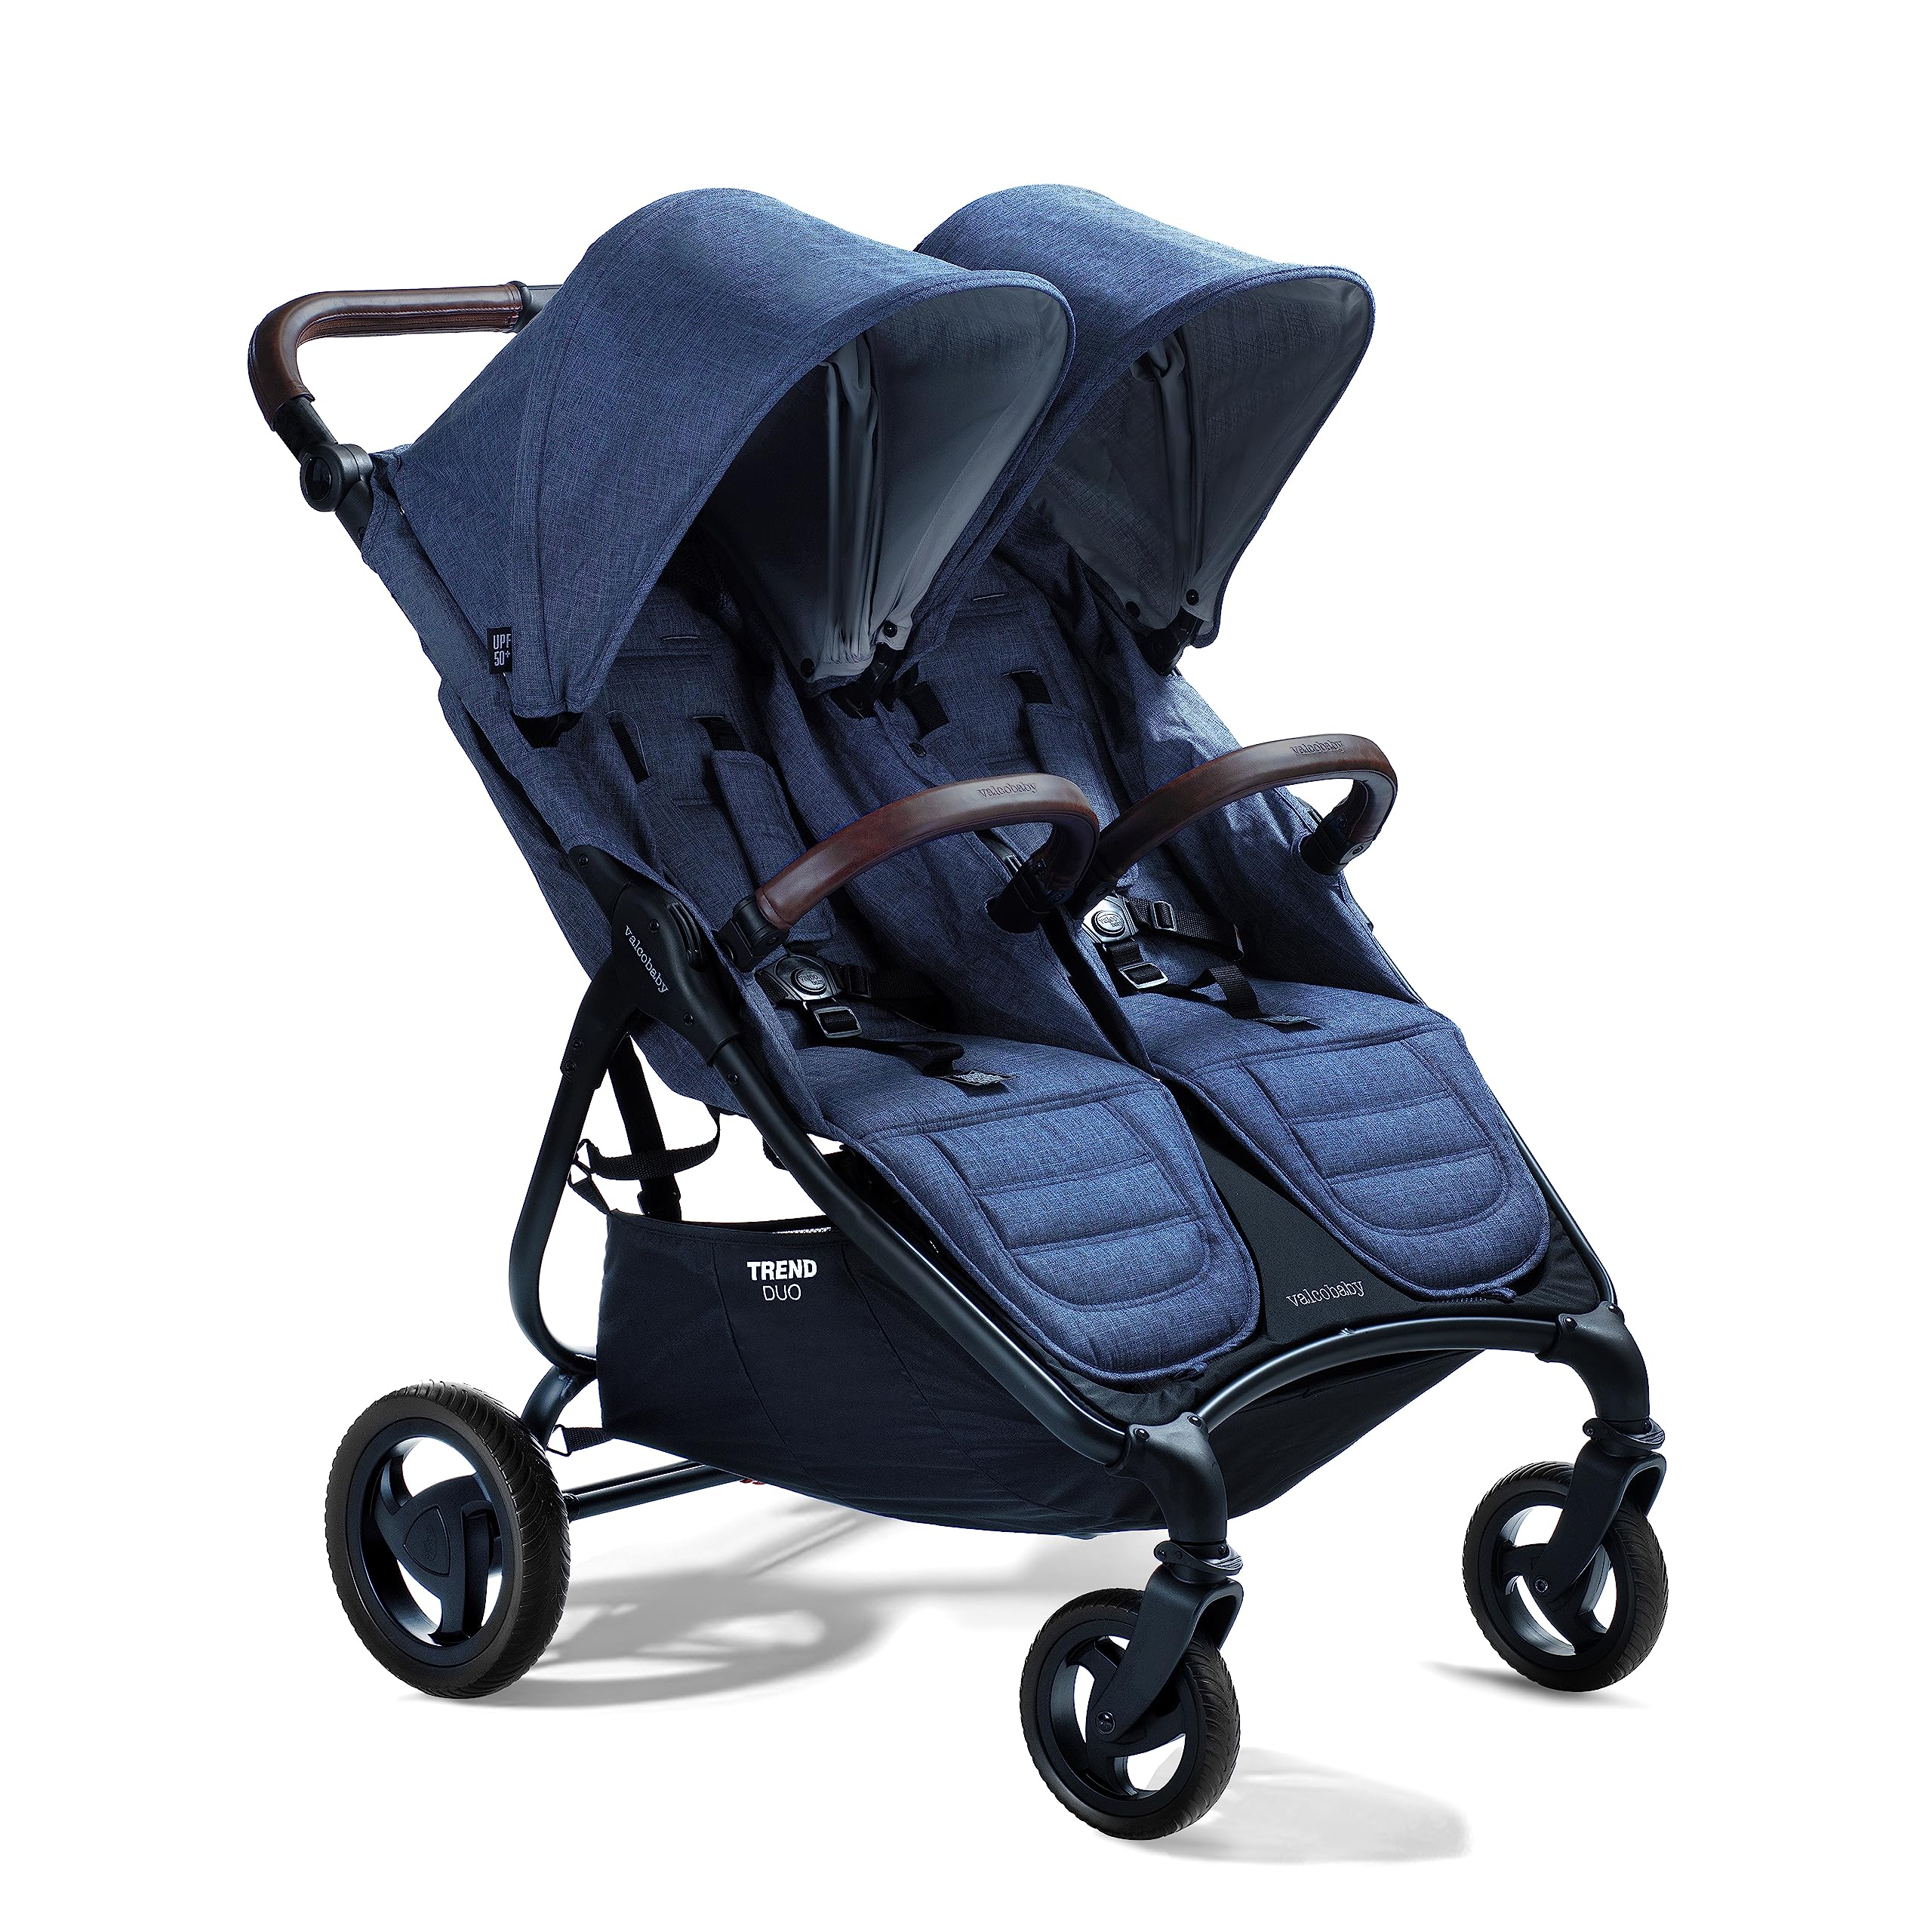 Valco Baby Trend Duo Light Weight Side by Side Double Stroller 2023 (Denim Blue) - Easy and Compact fold, Multi-Position Recline, Large Canopy, Independent Twin Vents and More - Luxurious Twin Pram